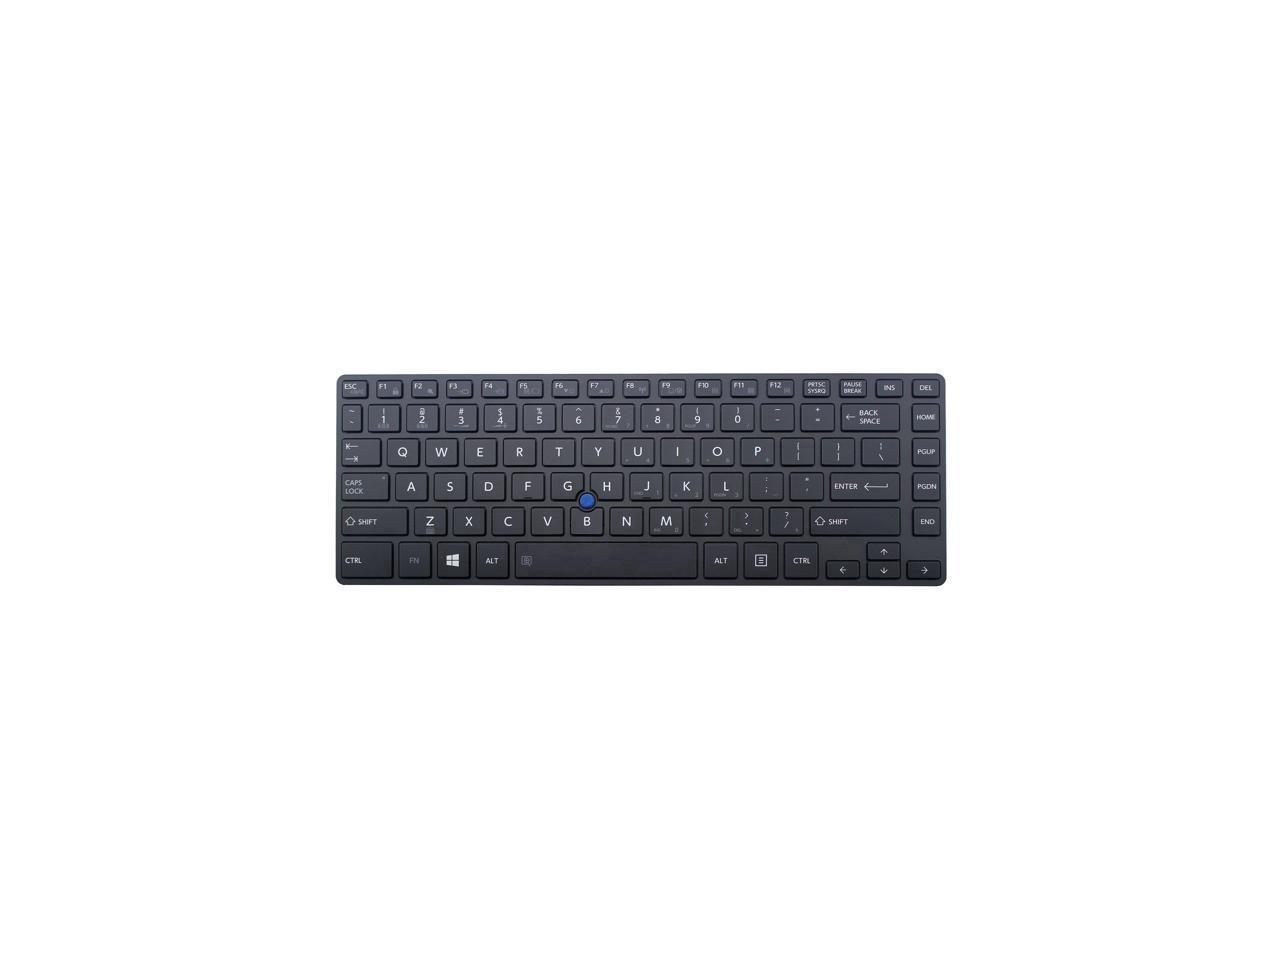 Gobuy New Laptop Replacement Keyboard for Toshiba Tecra Z40 Z40-A Z40-A1402 Z40-A1401 Z40-AK01M Z40-AK03M Z40-AK05M Series US Layout Black Color 